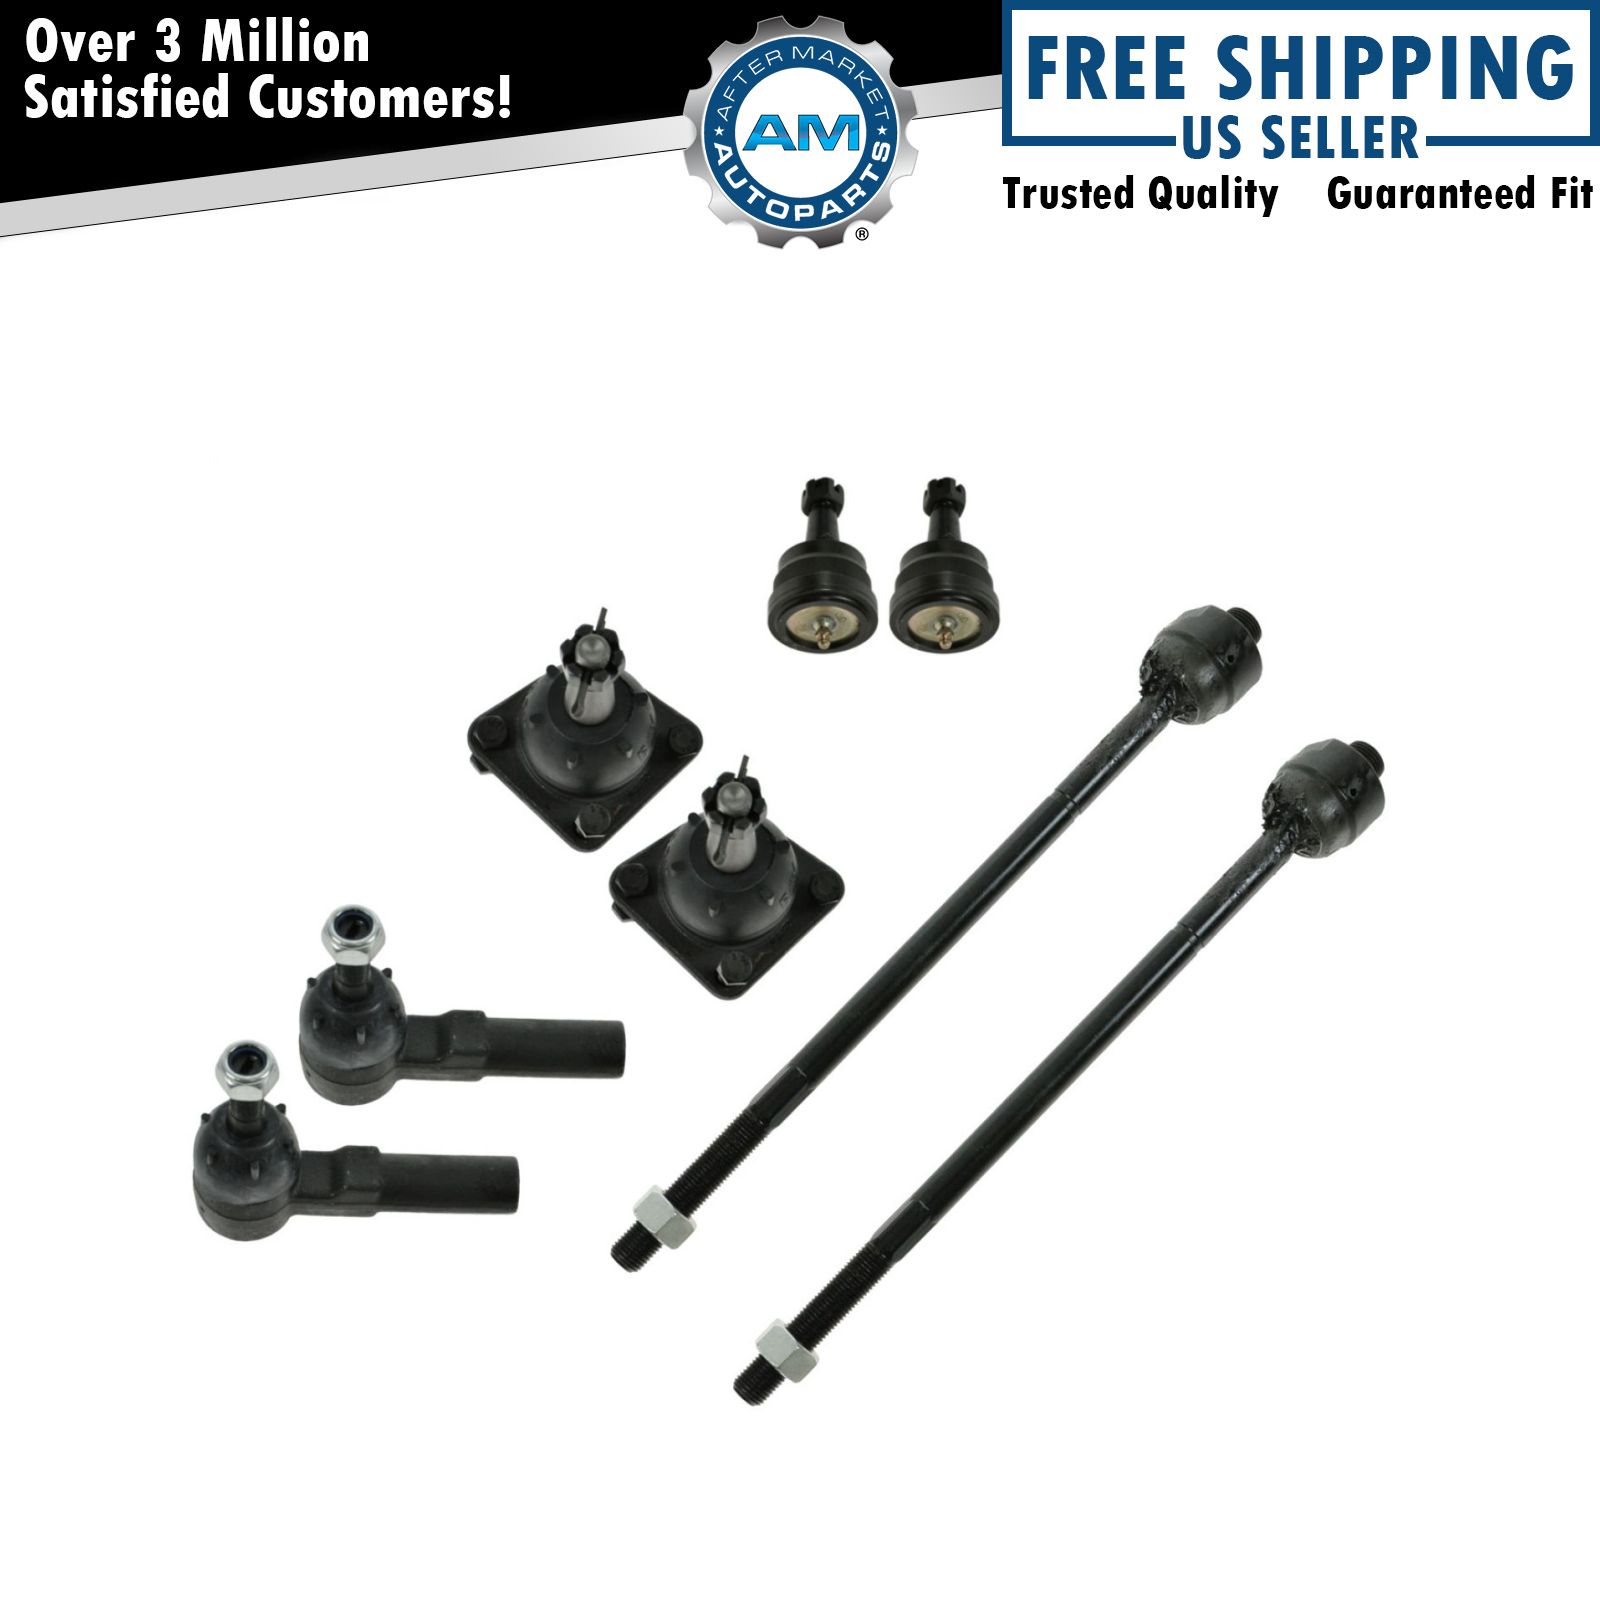 Front Tie Rod End Ball Joint Kit for 93-02 Chevy Camaro Firebird Trans Am